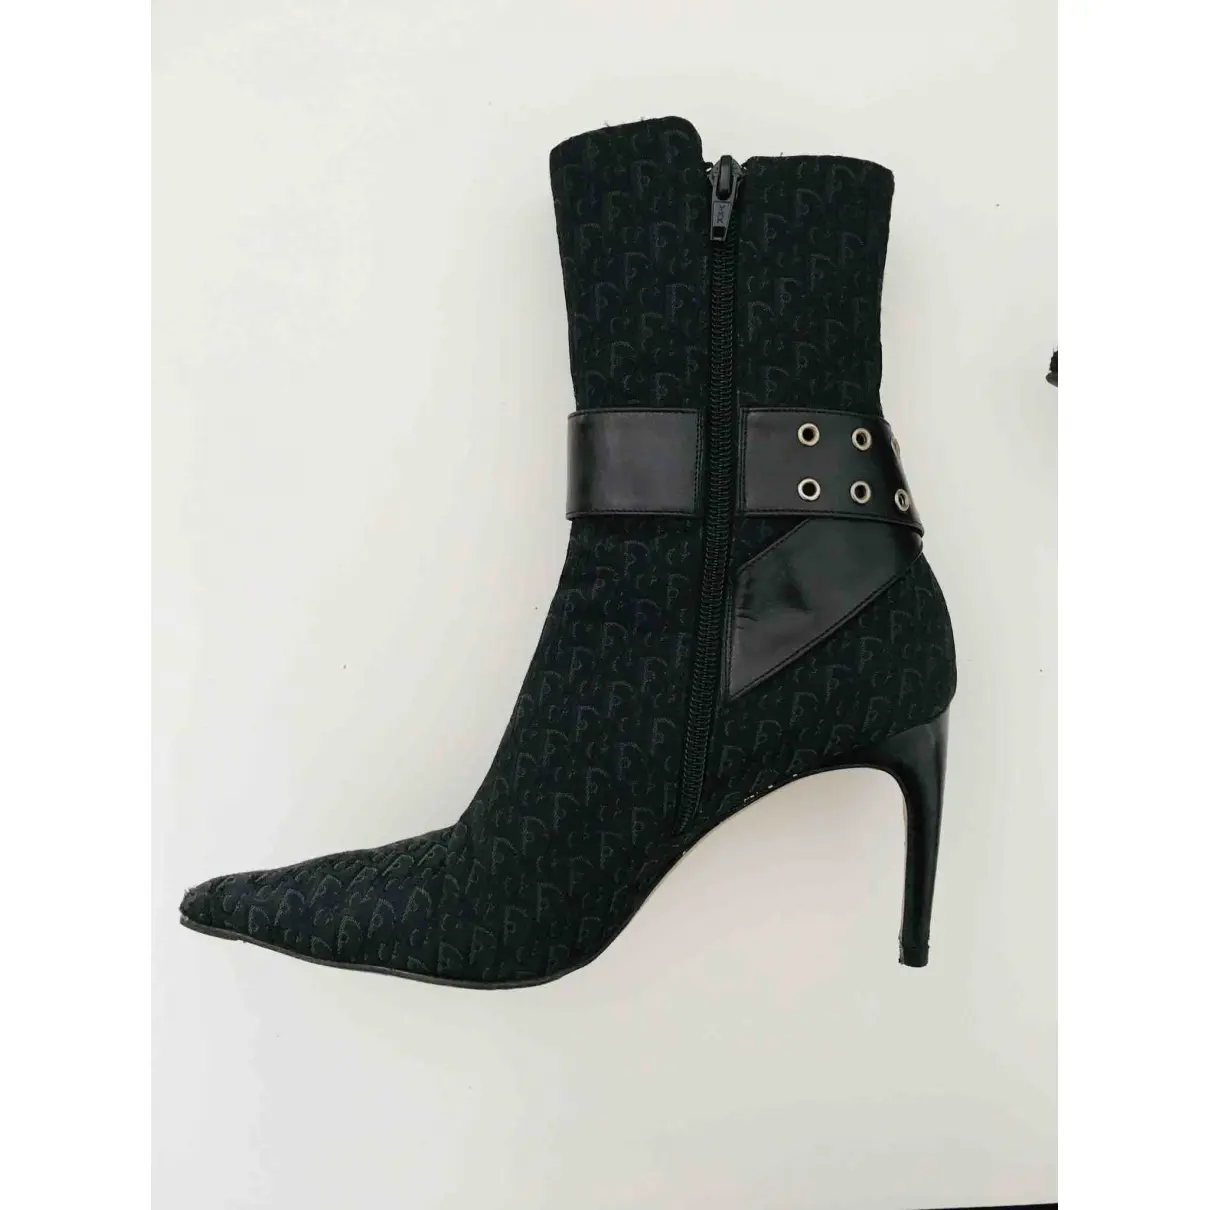 D-Choc leather buckled boots Dior